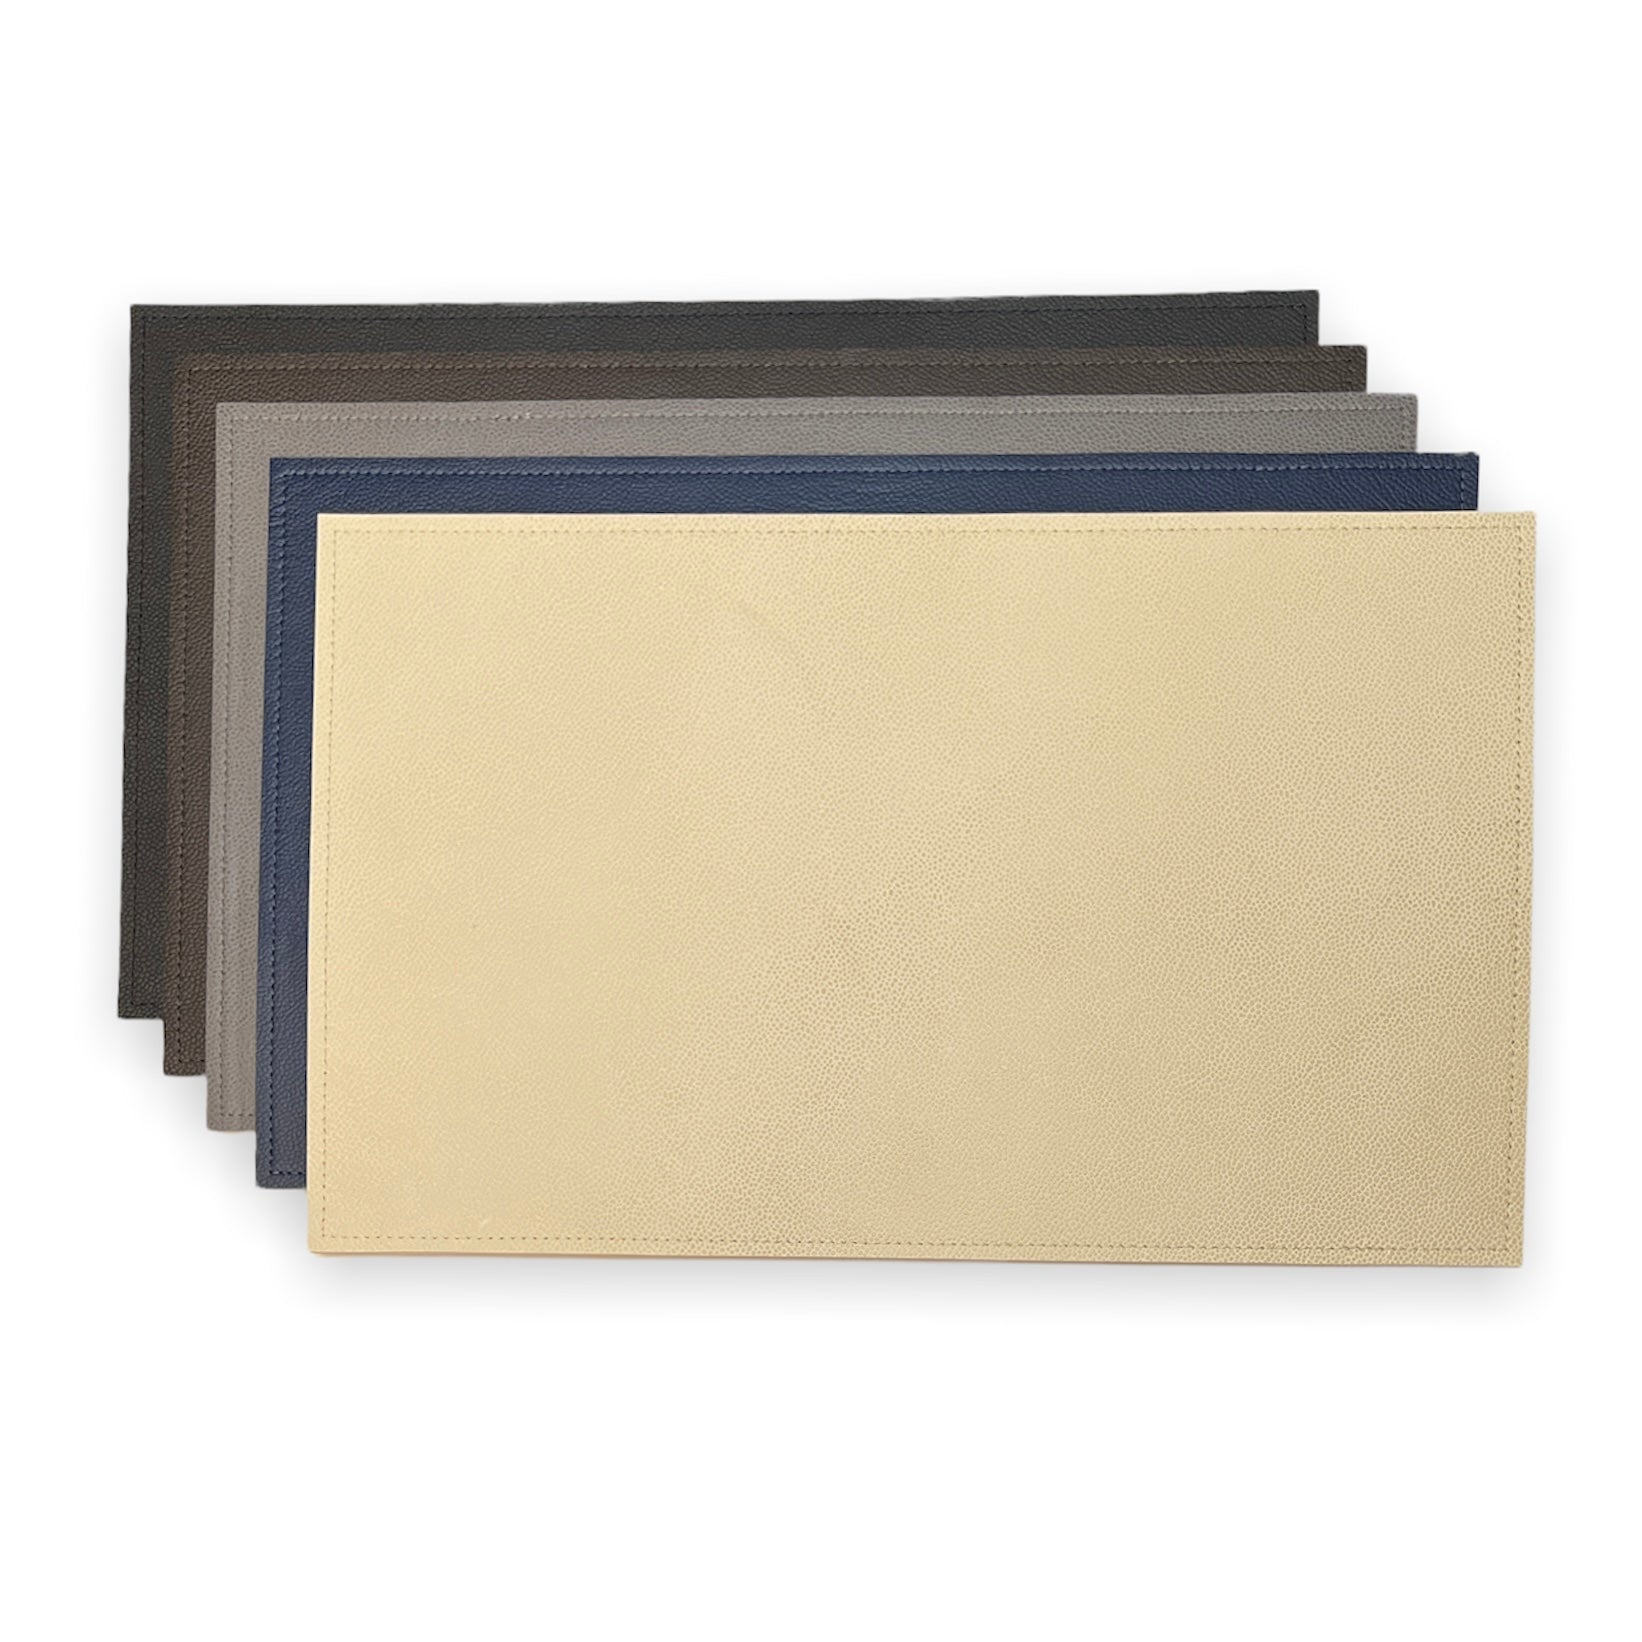 PD Leather Placemats - Set of 6